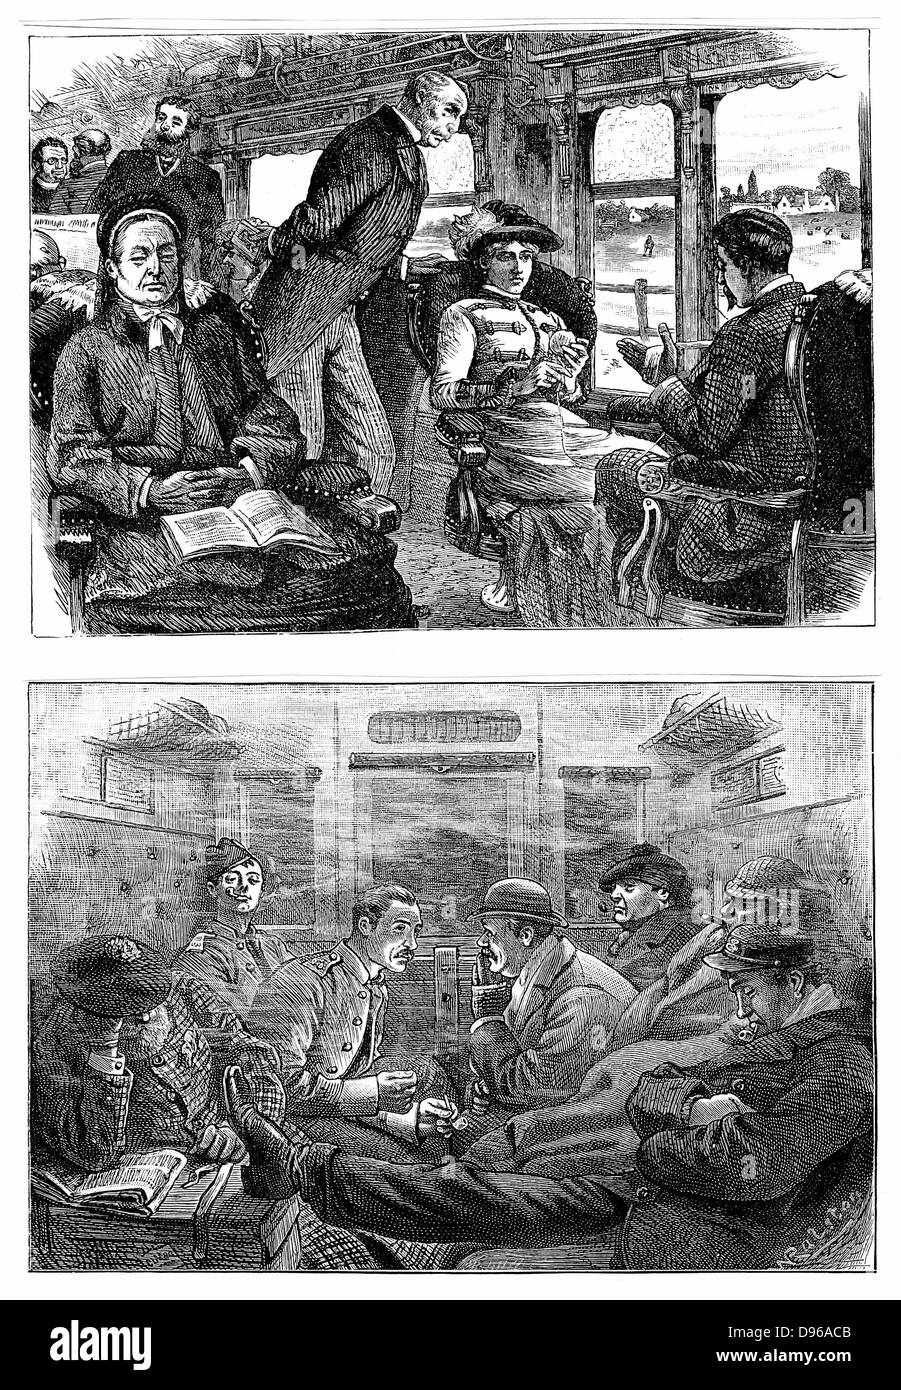 Passengers on a London to Glasgow train. Top: As It Should Be (comfortable and well-ordered). Bottom: As it Is (crowded and smoky). Wood engraving 1884 Stock Photo